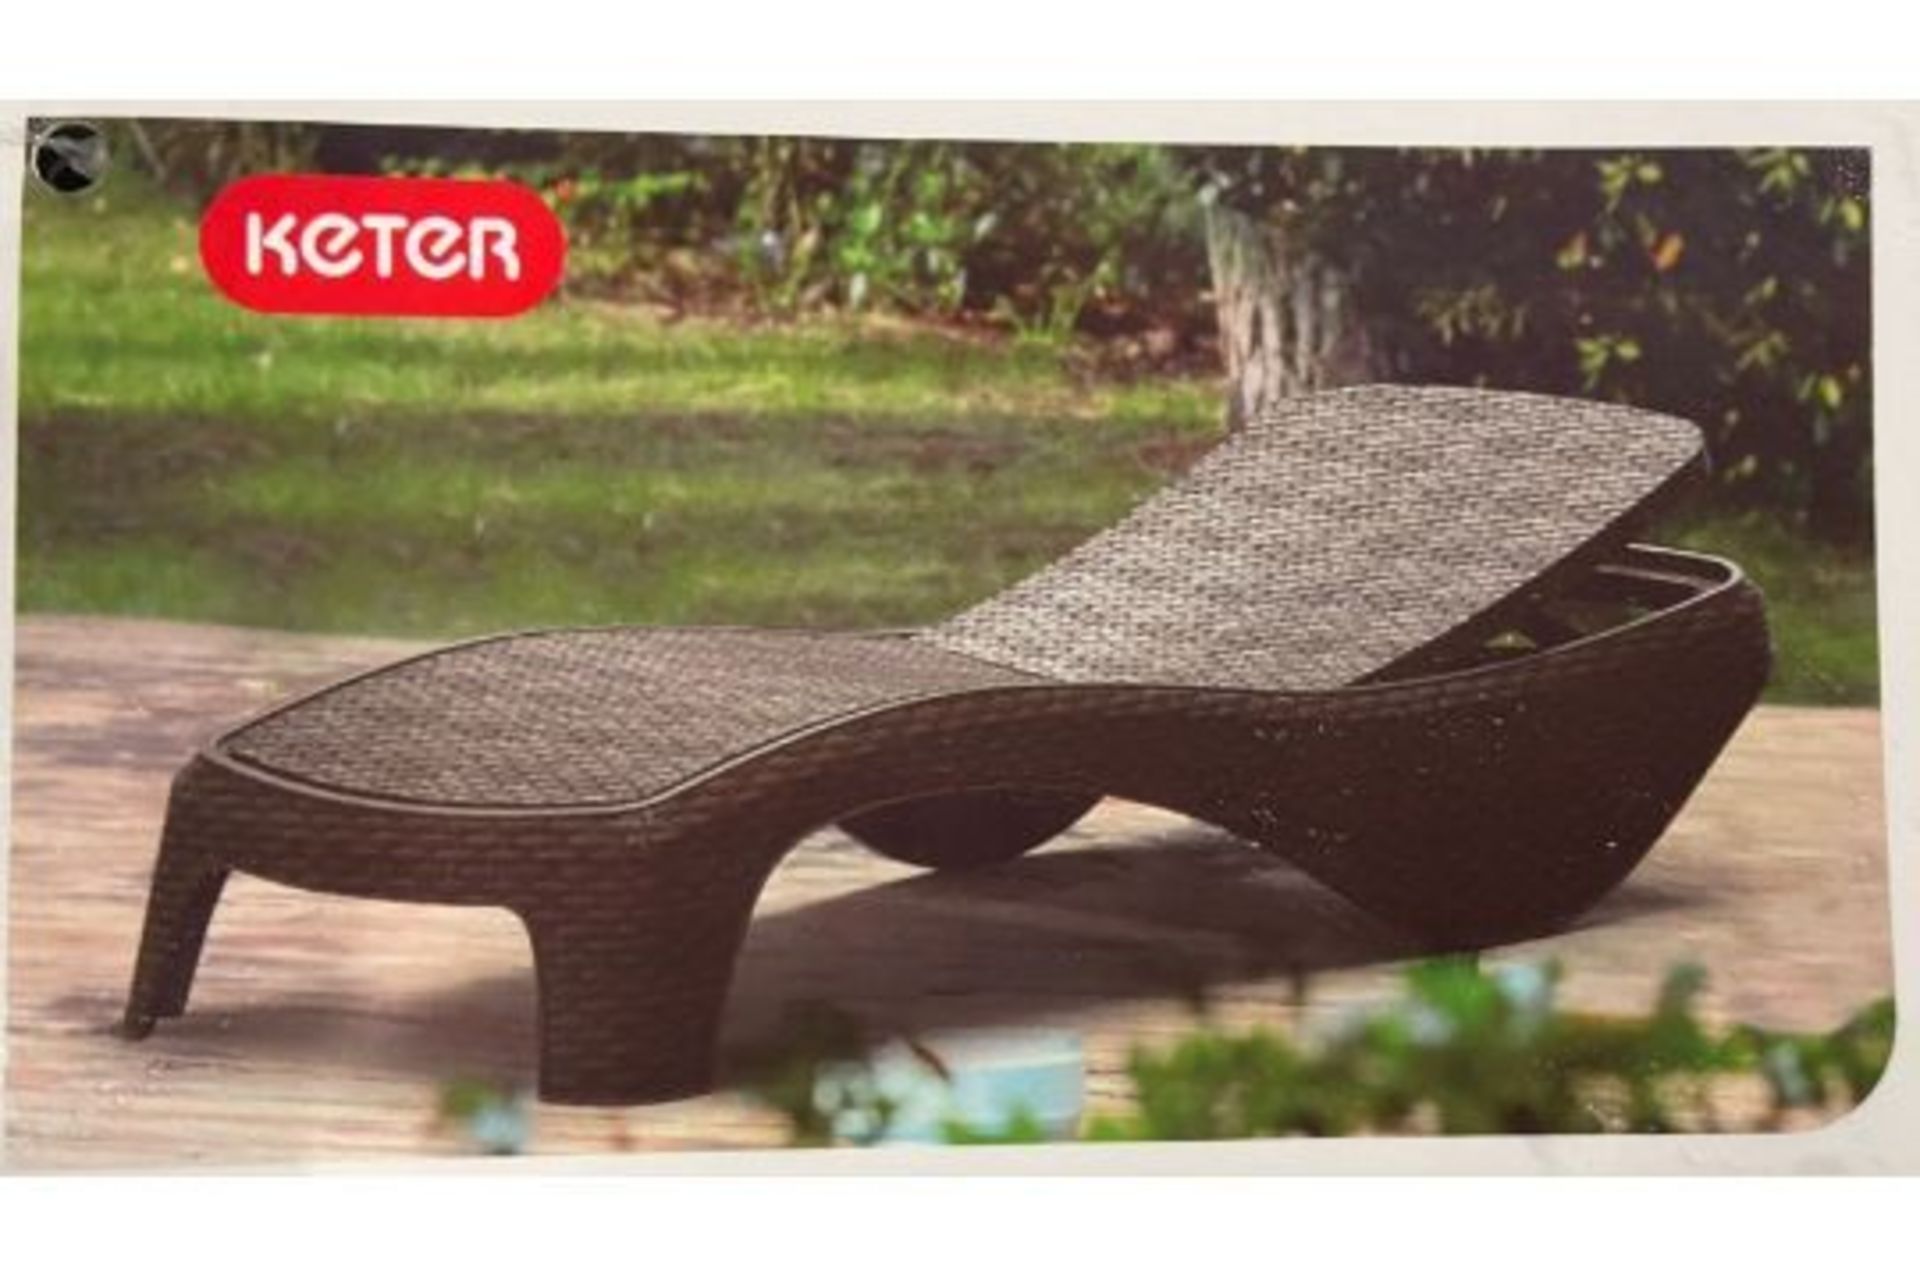 New Keter Black Plastic Reclining Sun Lounger - COLLECTION ONLY - VERY LIMITED STOCK